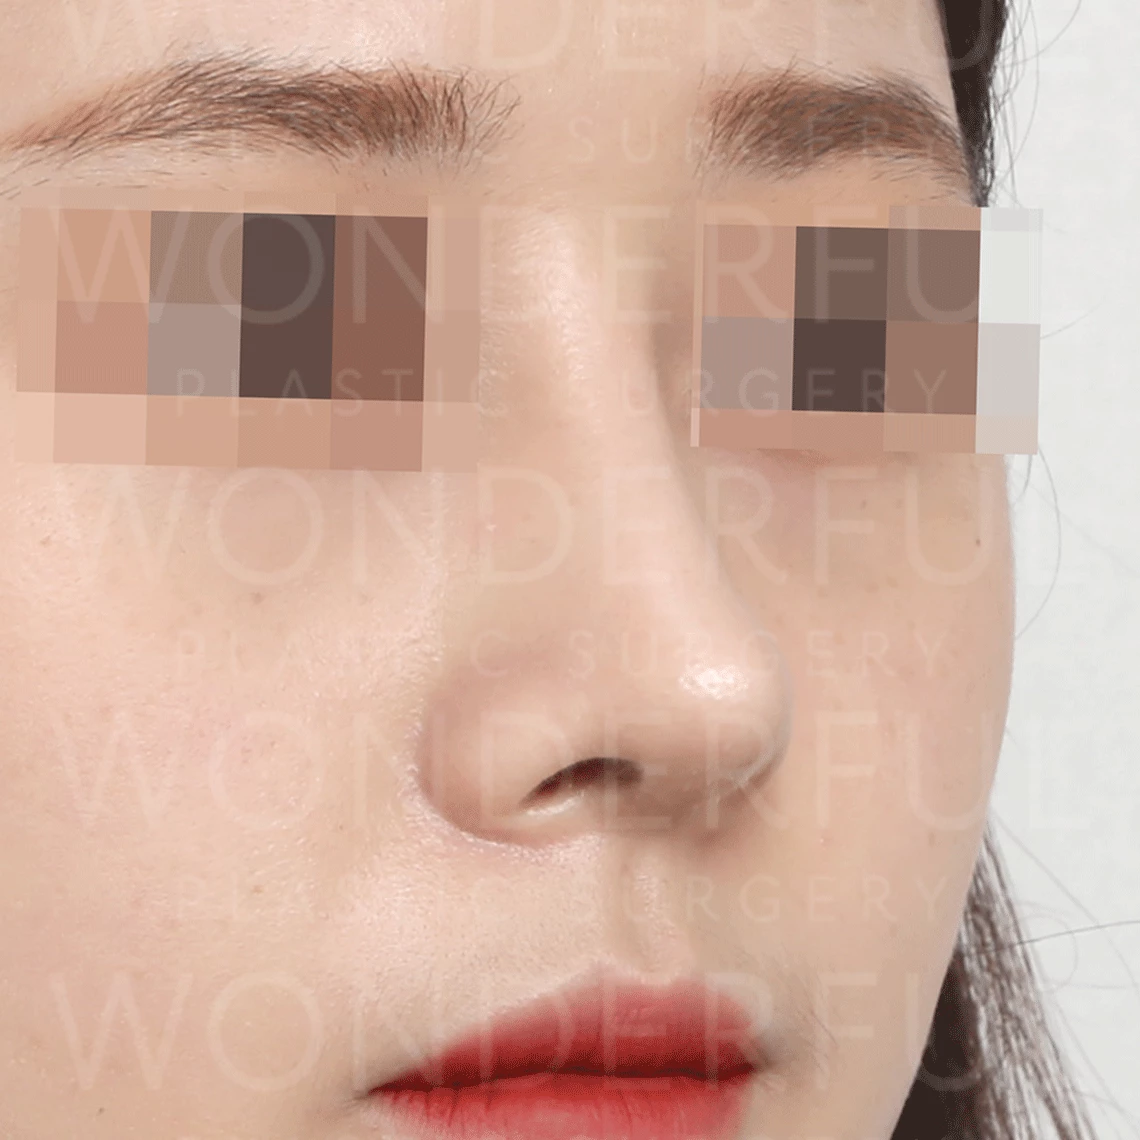 wonderful-plastic-surgery-hospital-korea-arrow-nose-rhinoplasty-before-after-results-after-1